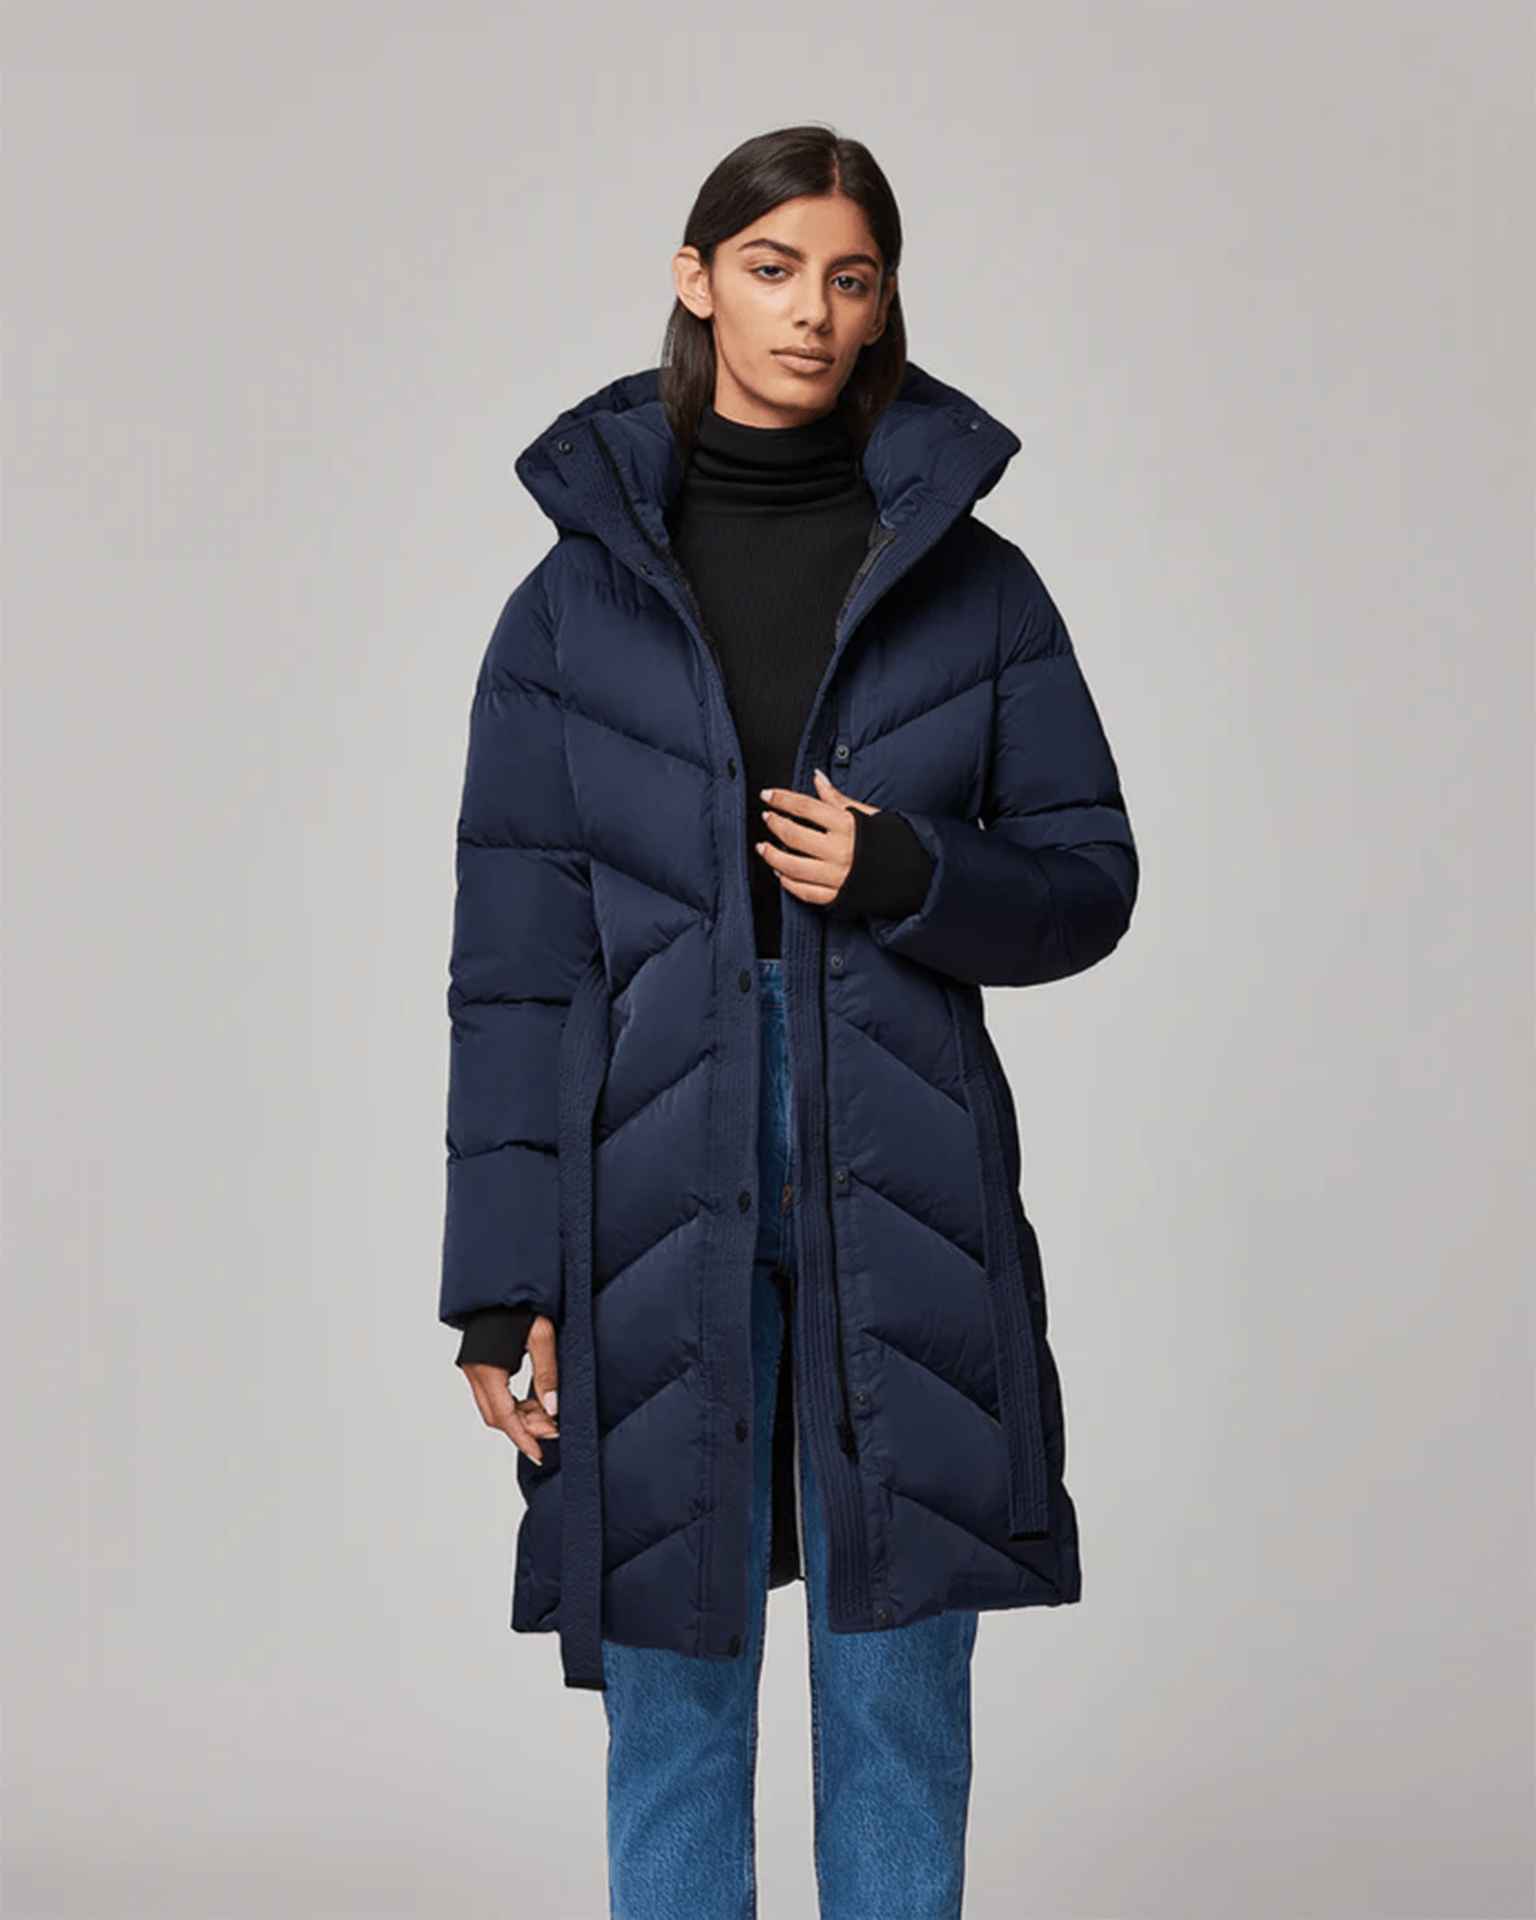 Bryanna Semi-Fitted Knee-Length Puffer in Lapis – Bliss Boutiques